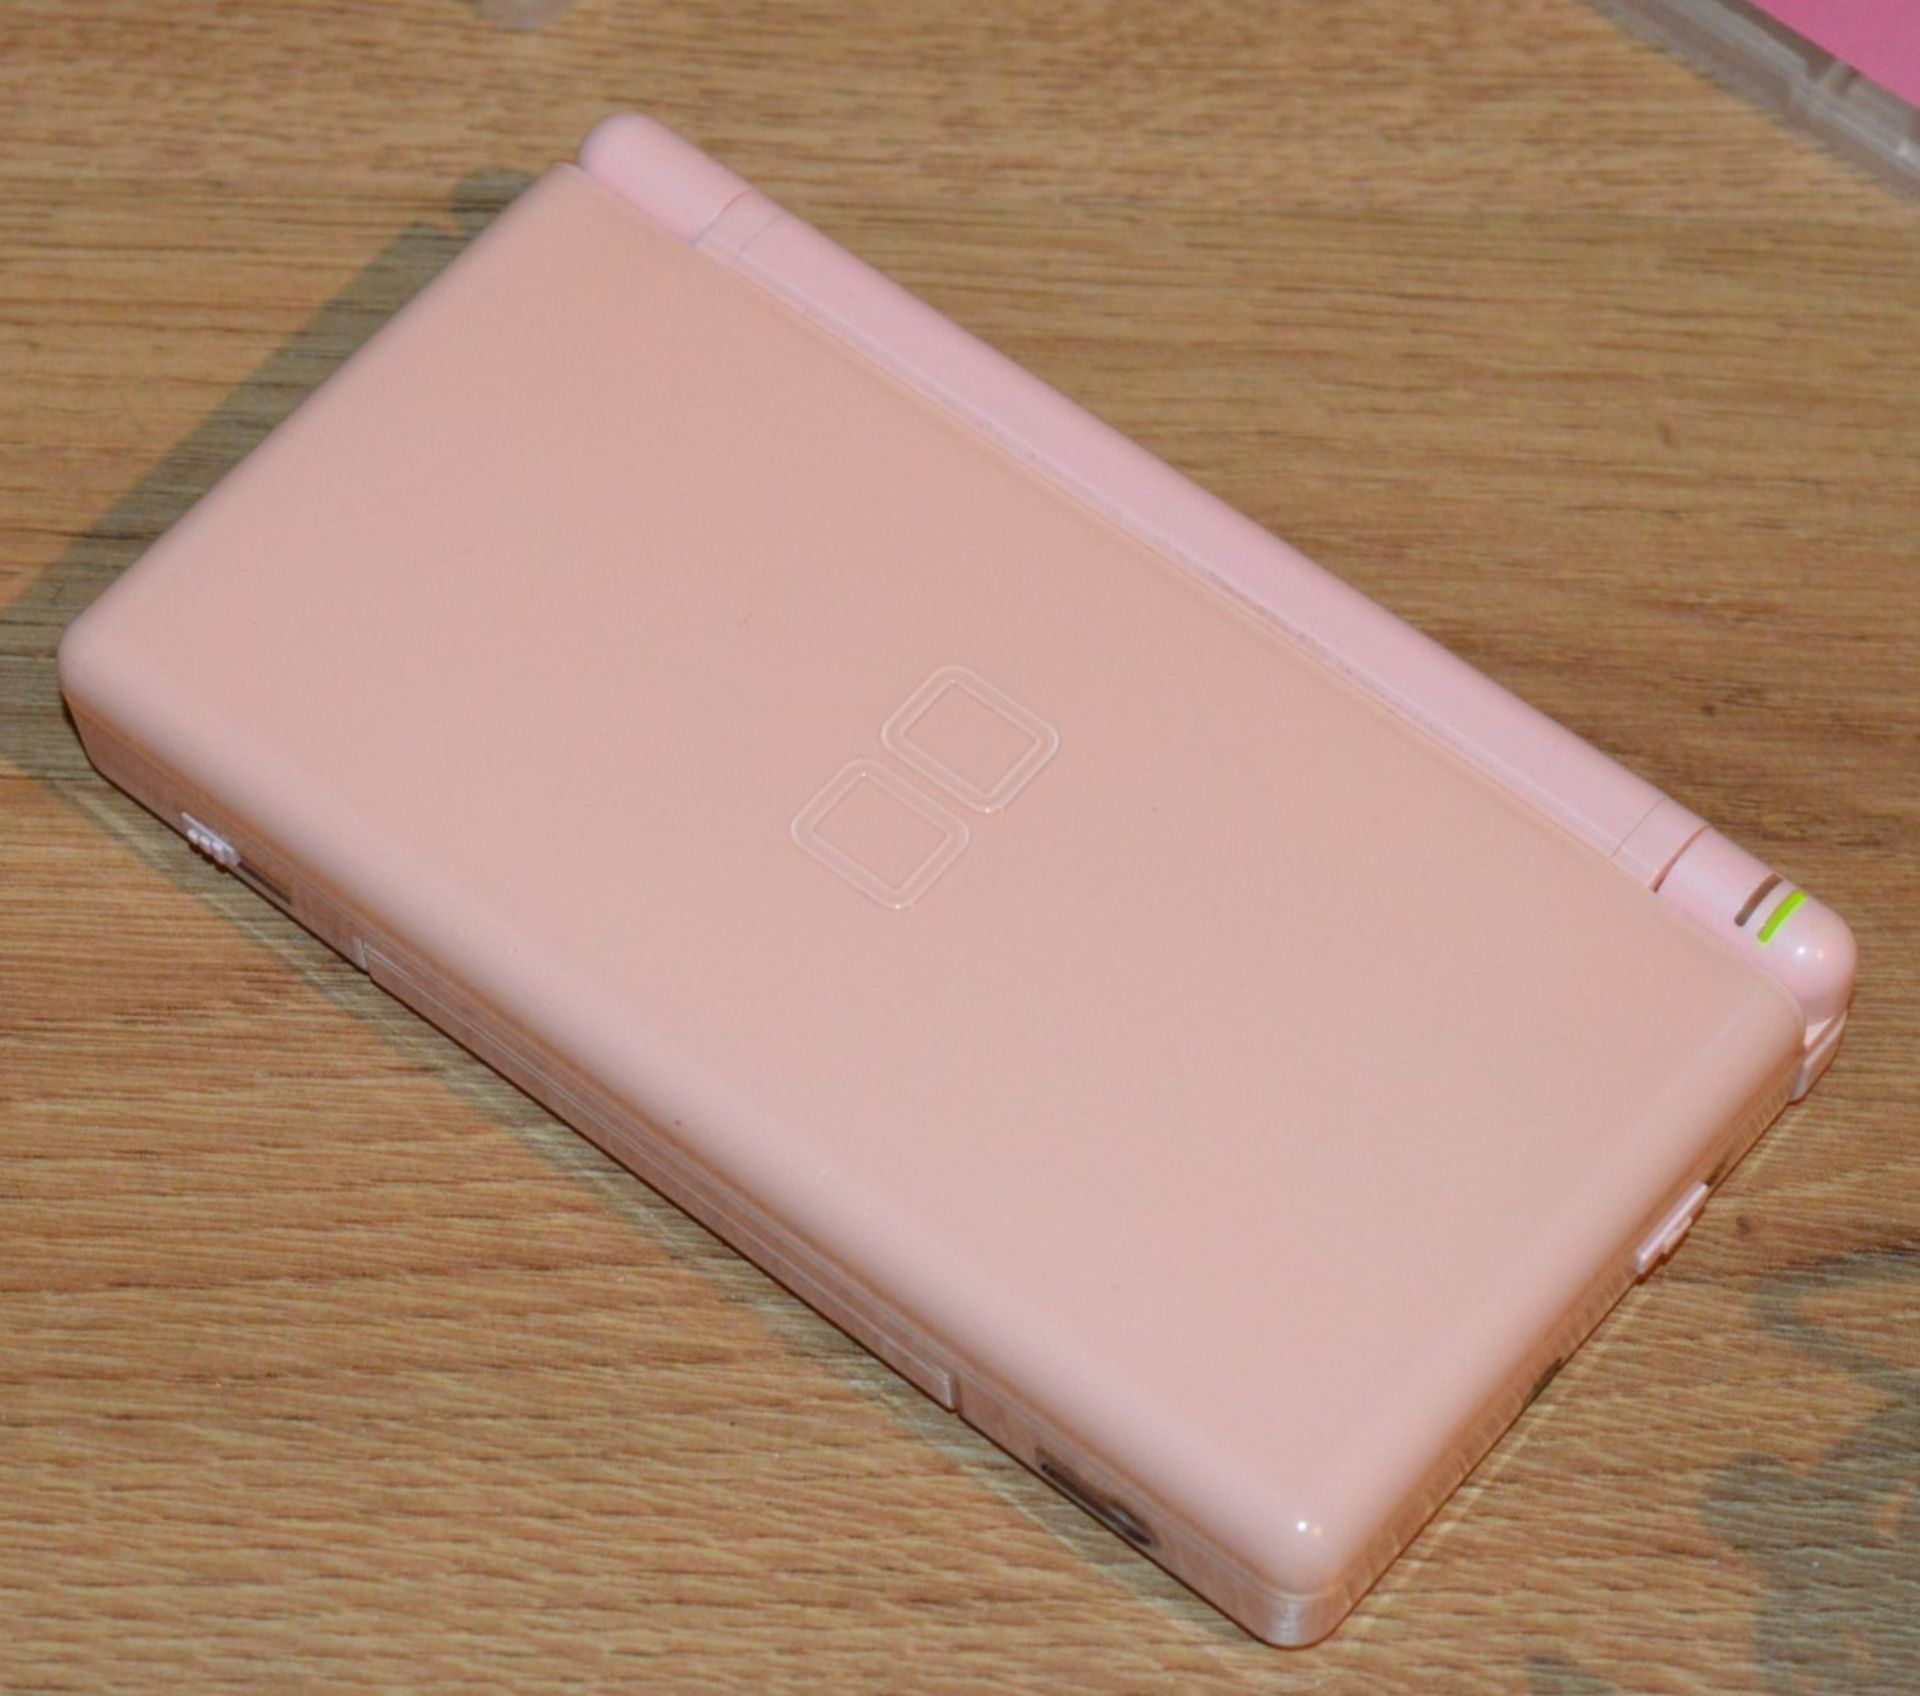 1 x Nintendo DS Pink Handheld Games Console - Includes Accessory Pack, Protector Case, Charger and - Image 6 of 6